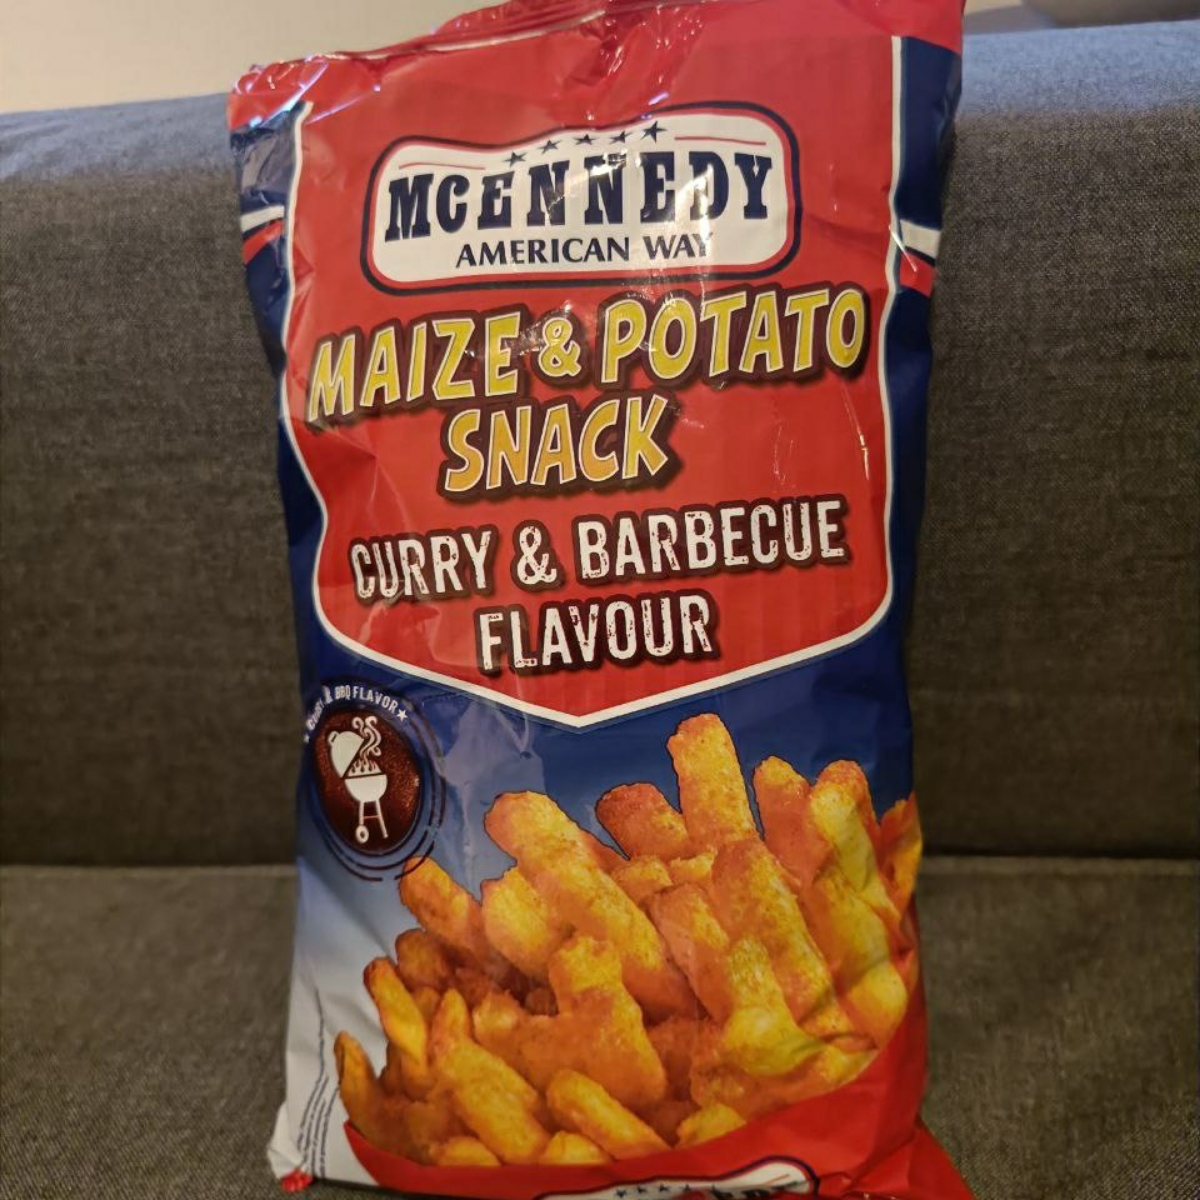 Curry | snack Barbecue Mcennedy and Review potato Maize flavor abillion and